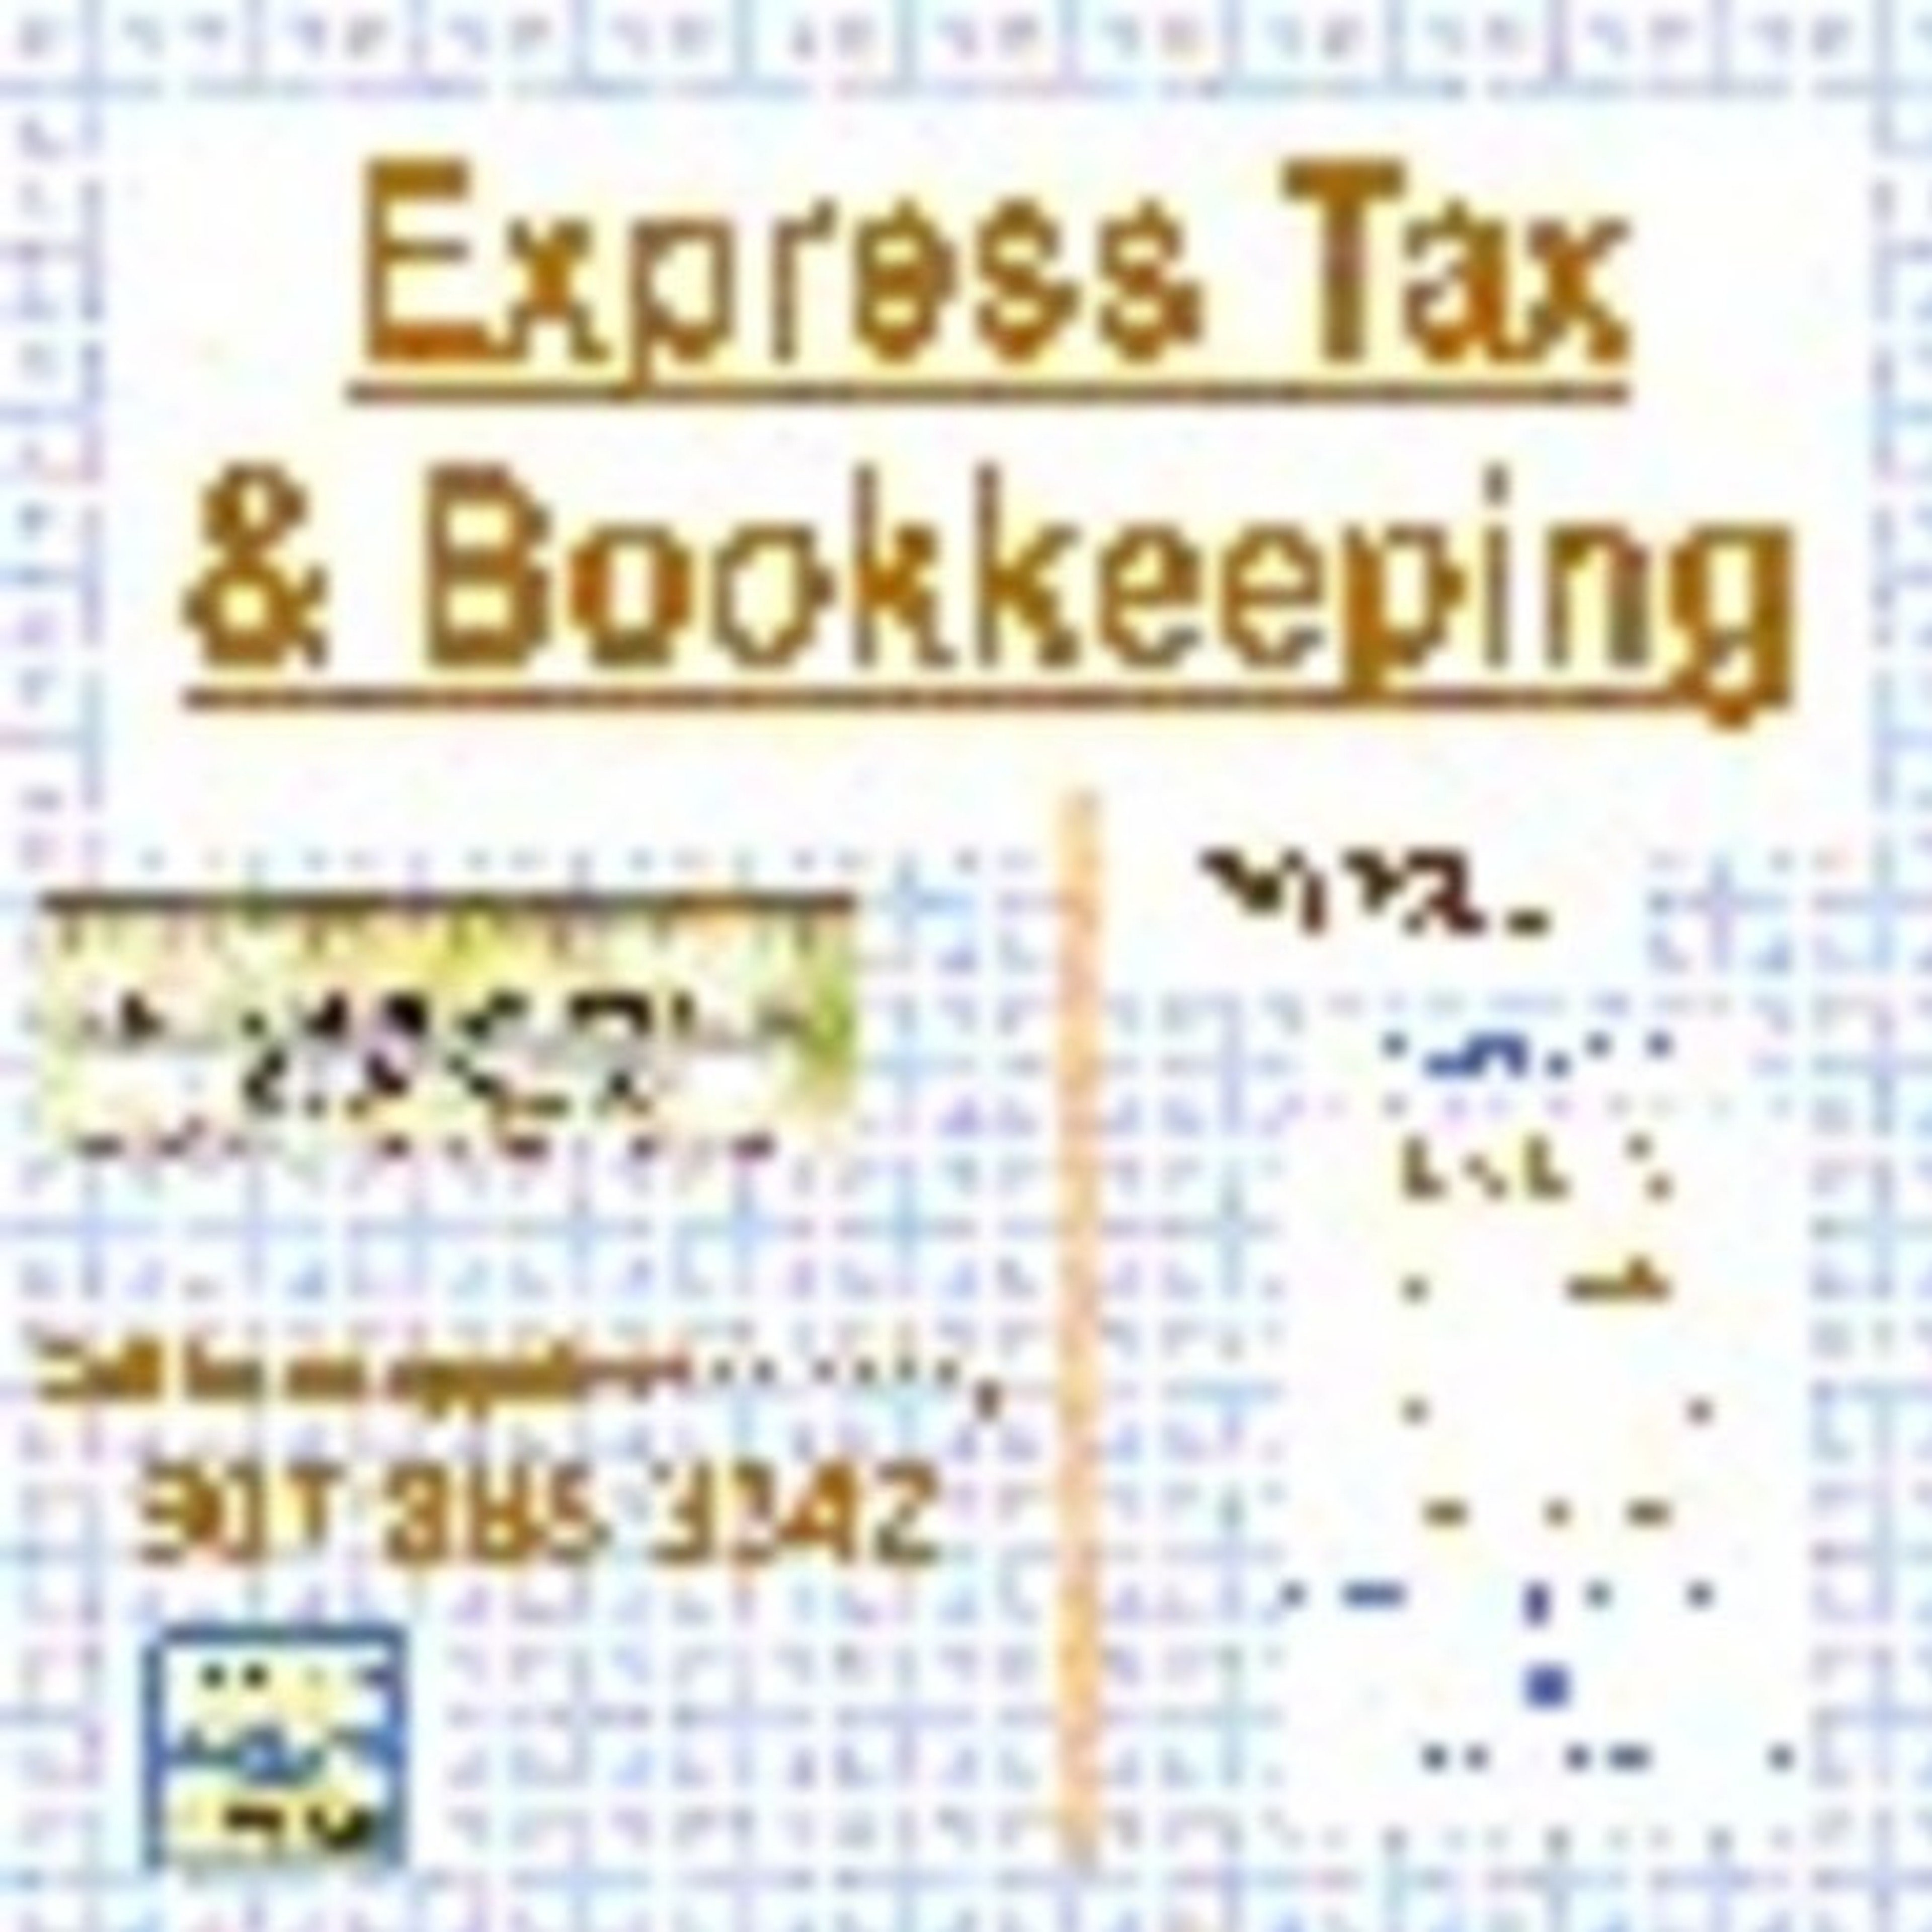 Nationwide Tax Preparation and Bookkeeping!